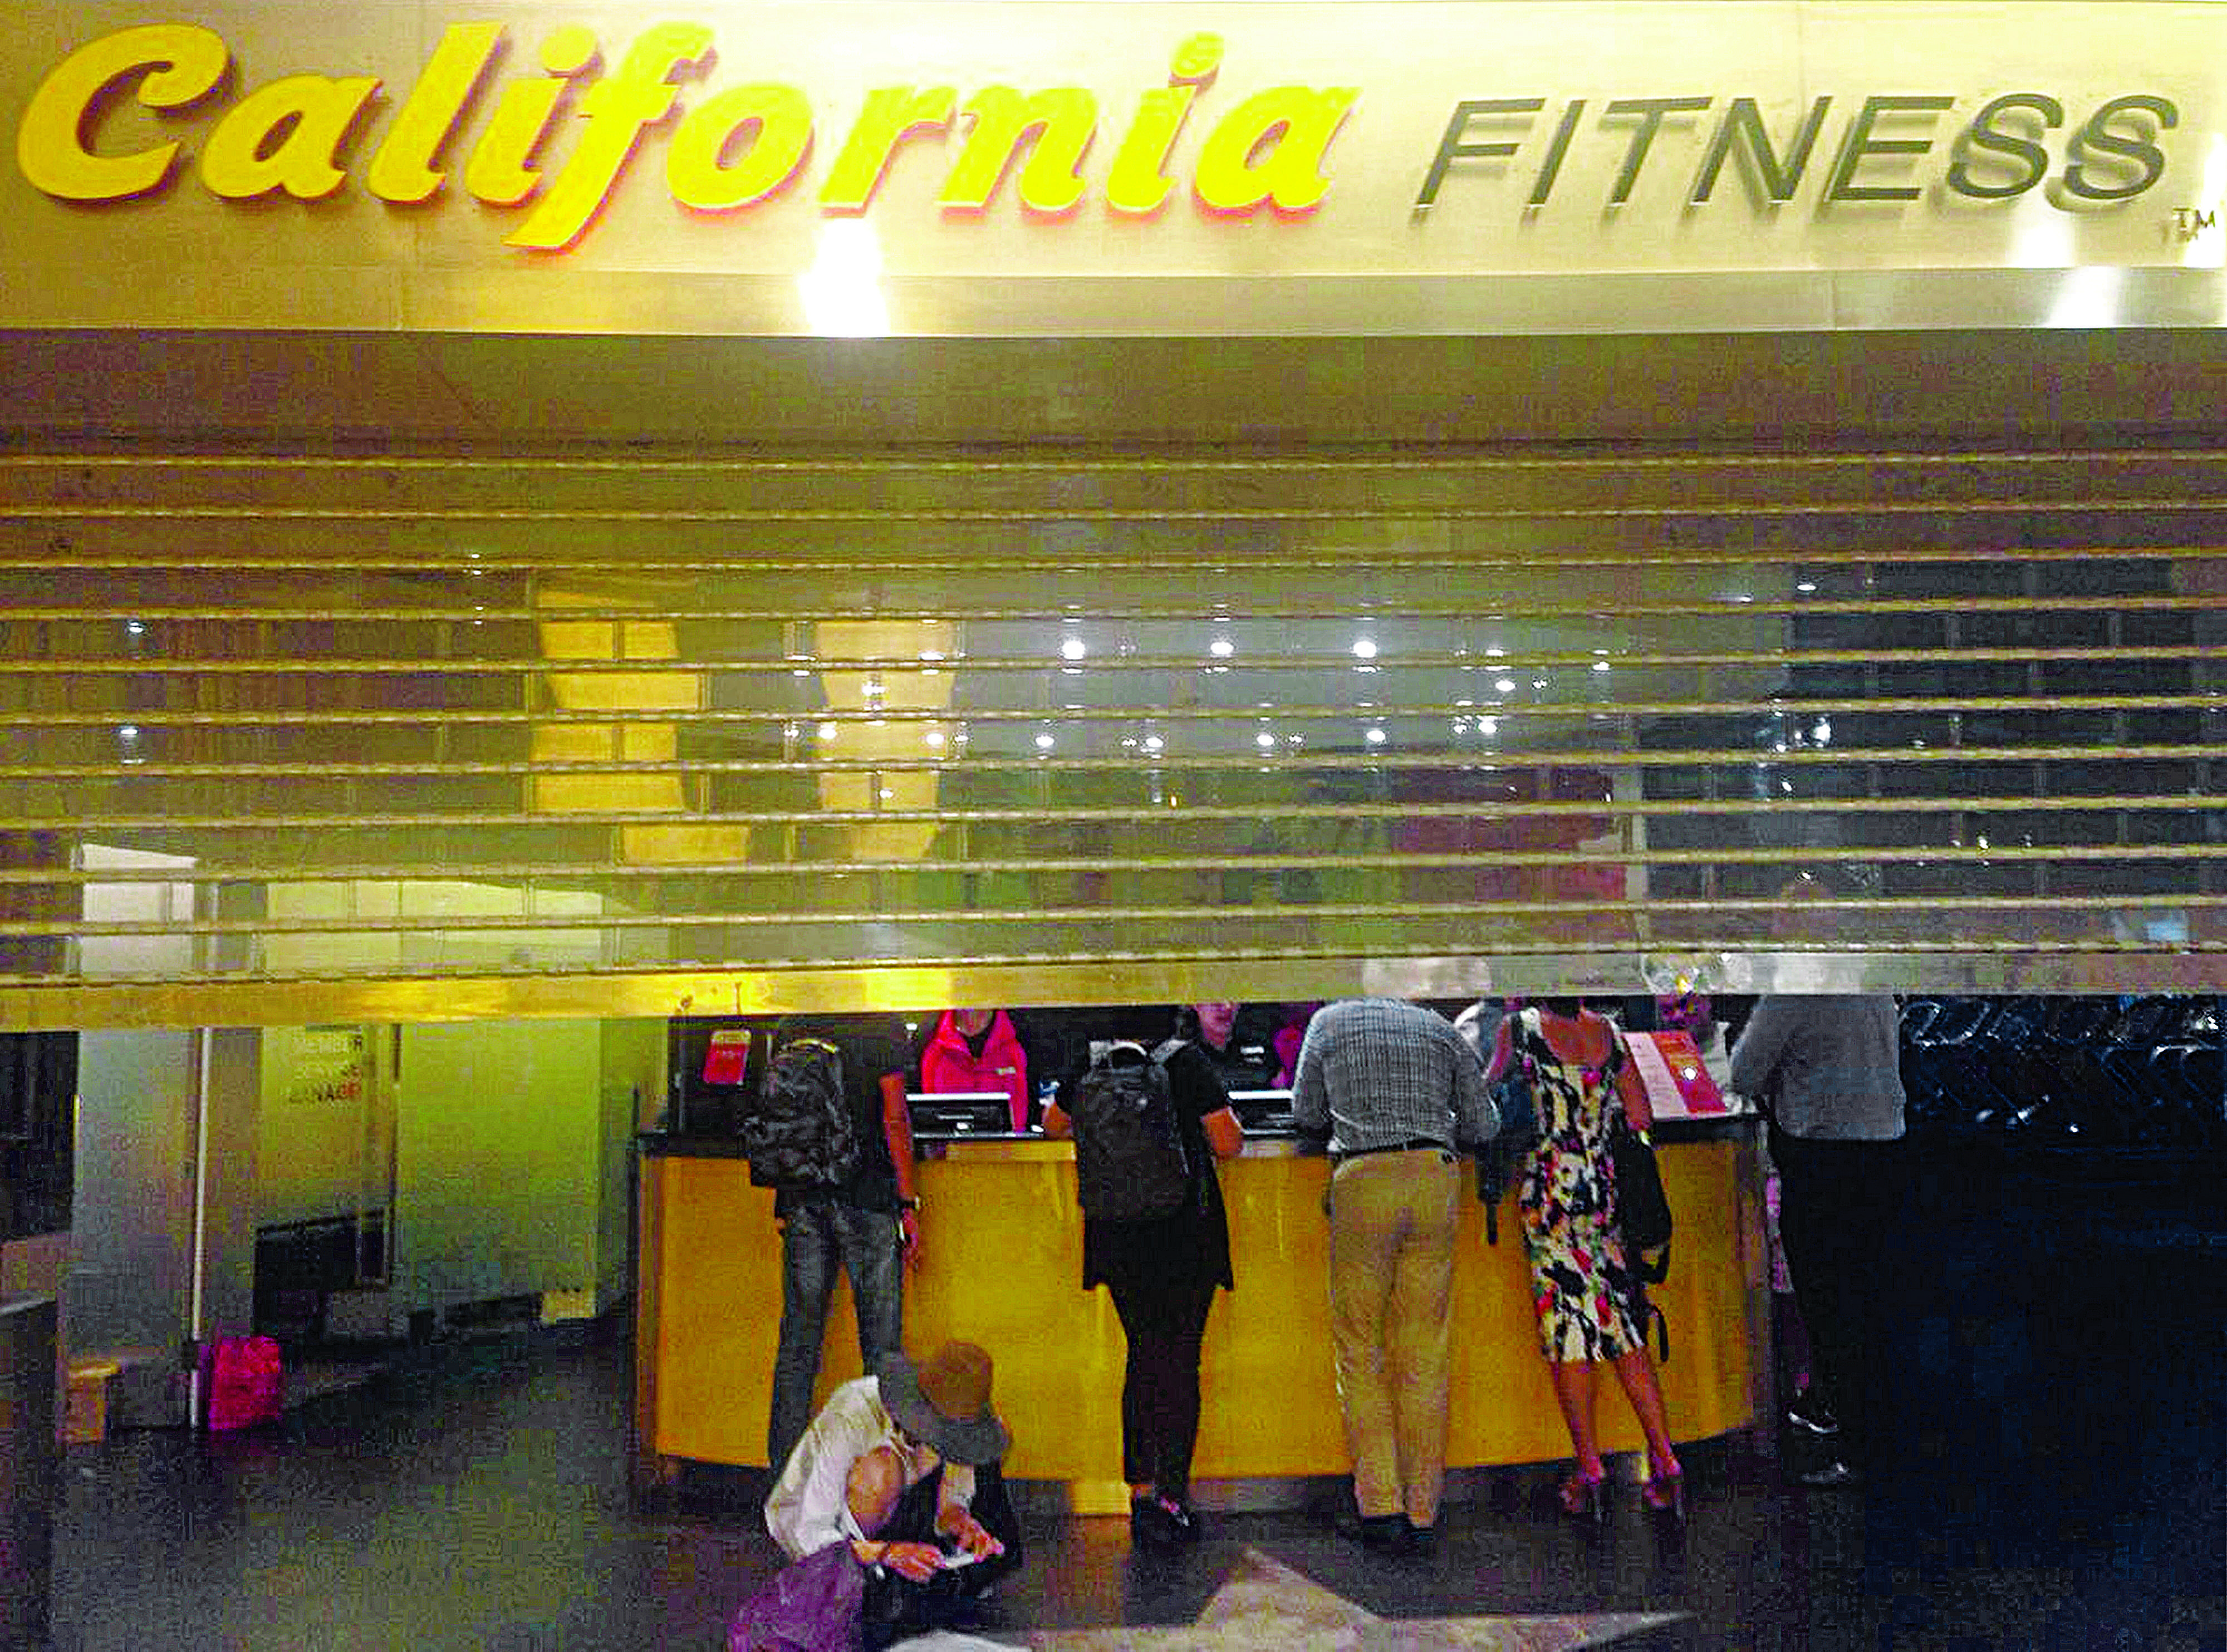 This branch of California Fitness in Beijing was closed on Friday. Photo: SCMP Pictures